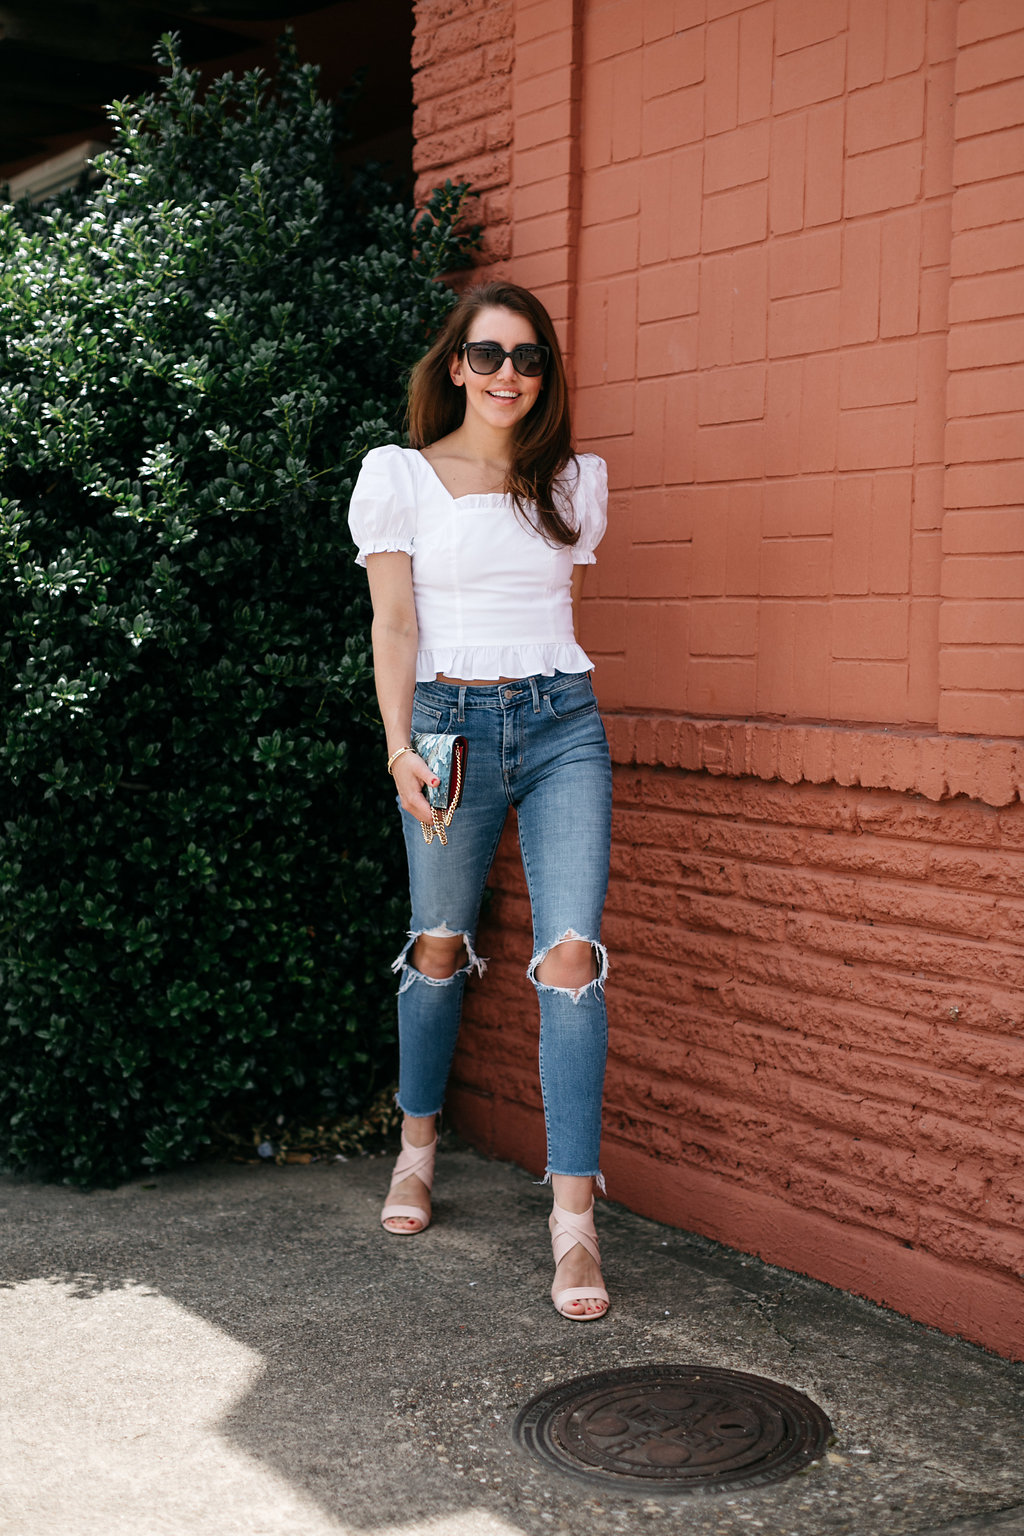 amy havins wears jeans and a white blouse.